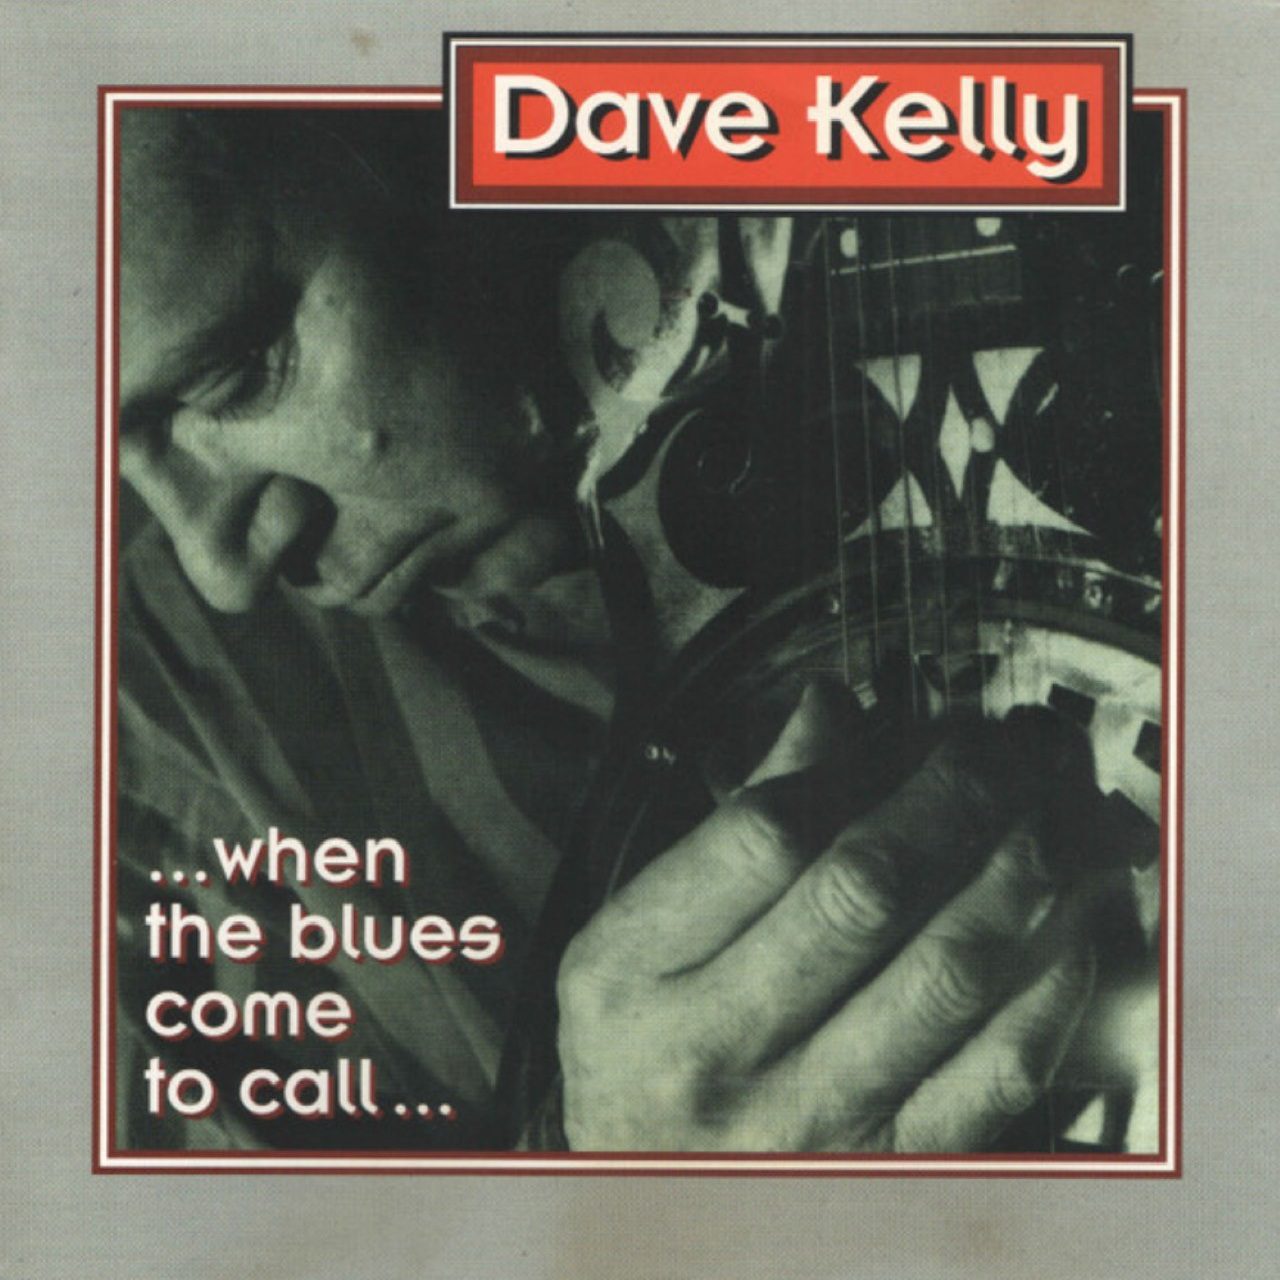 Dave Kelly – When The Blues Come To Call cover album